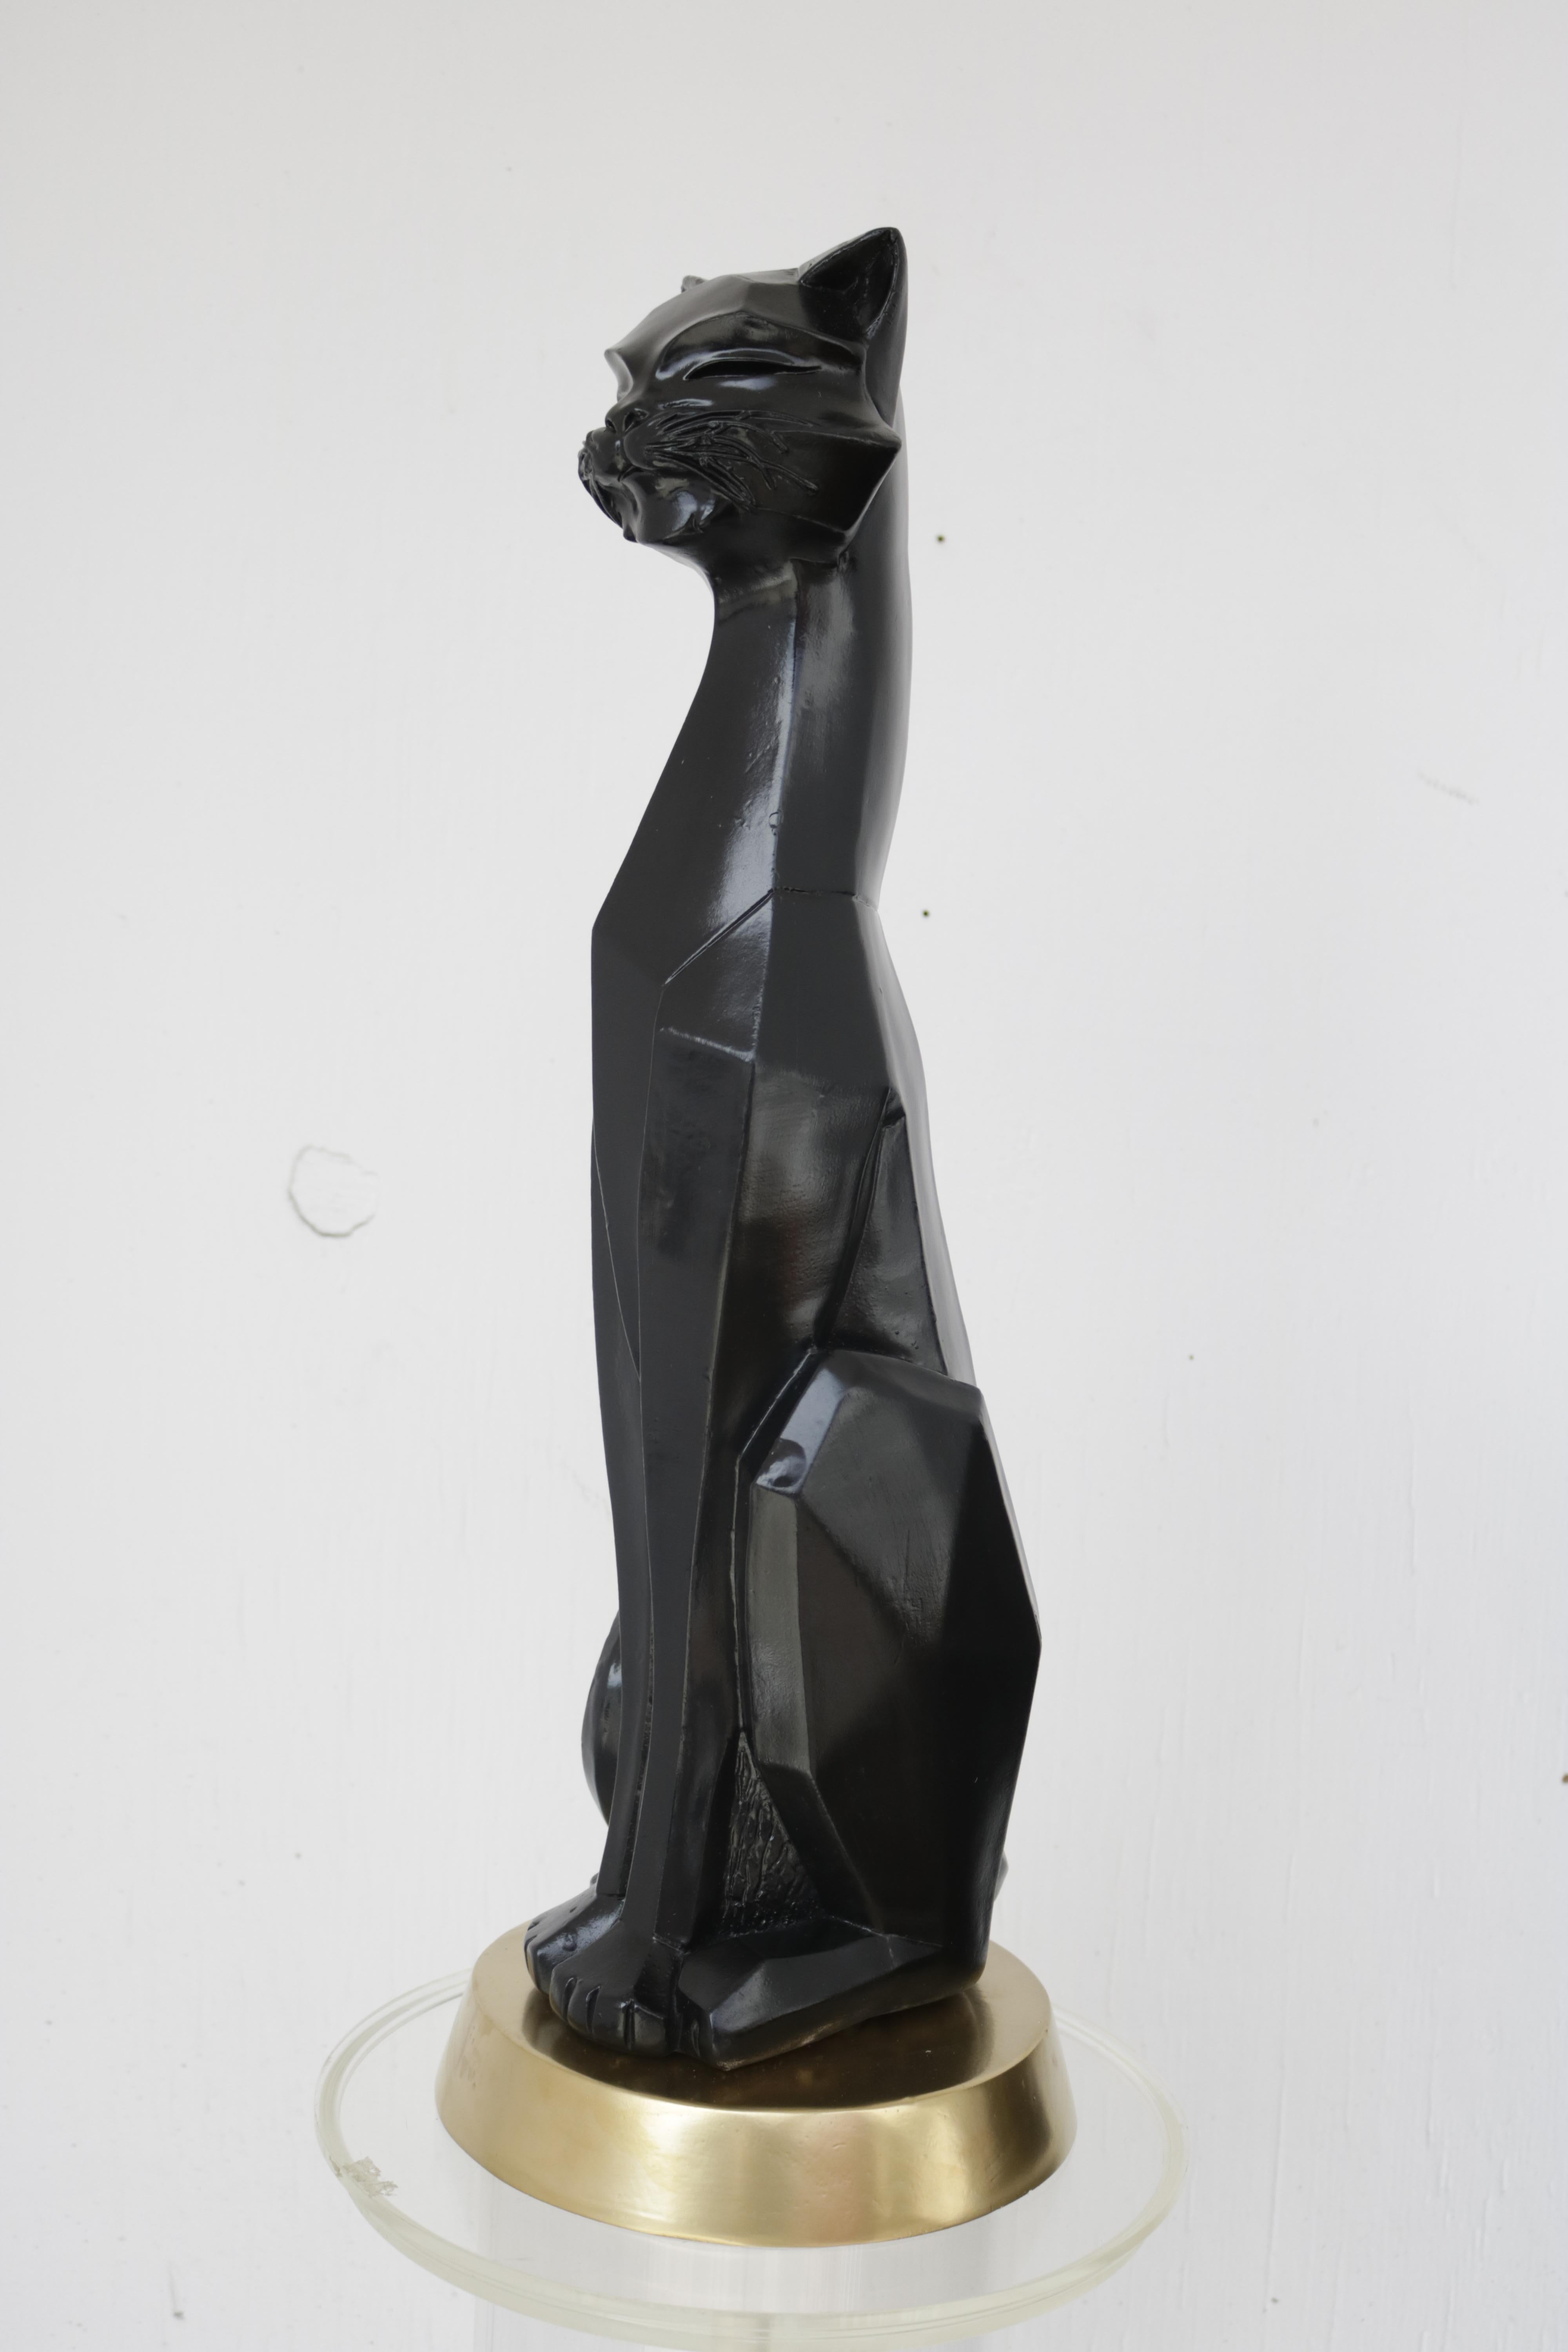 Modern Cubist-style plaster sculpture of a black Siamese cat on a gold base. From the 1960s and signed Universal Statuary Corp. The company was a Chicago based manufacturer founded in the 1930s that made chalk and plaster sculptures in whimsical